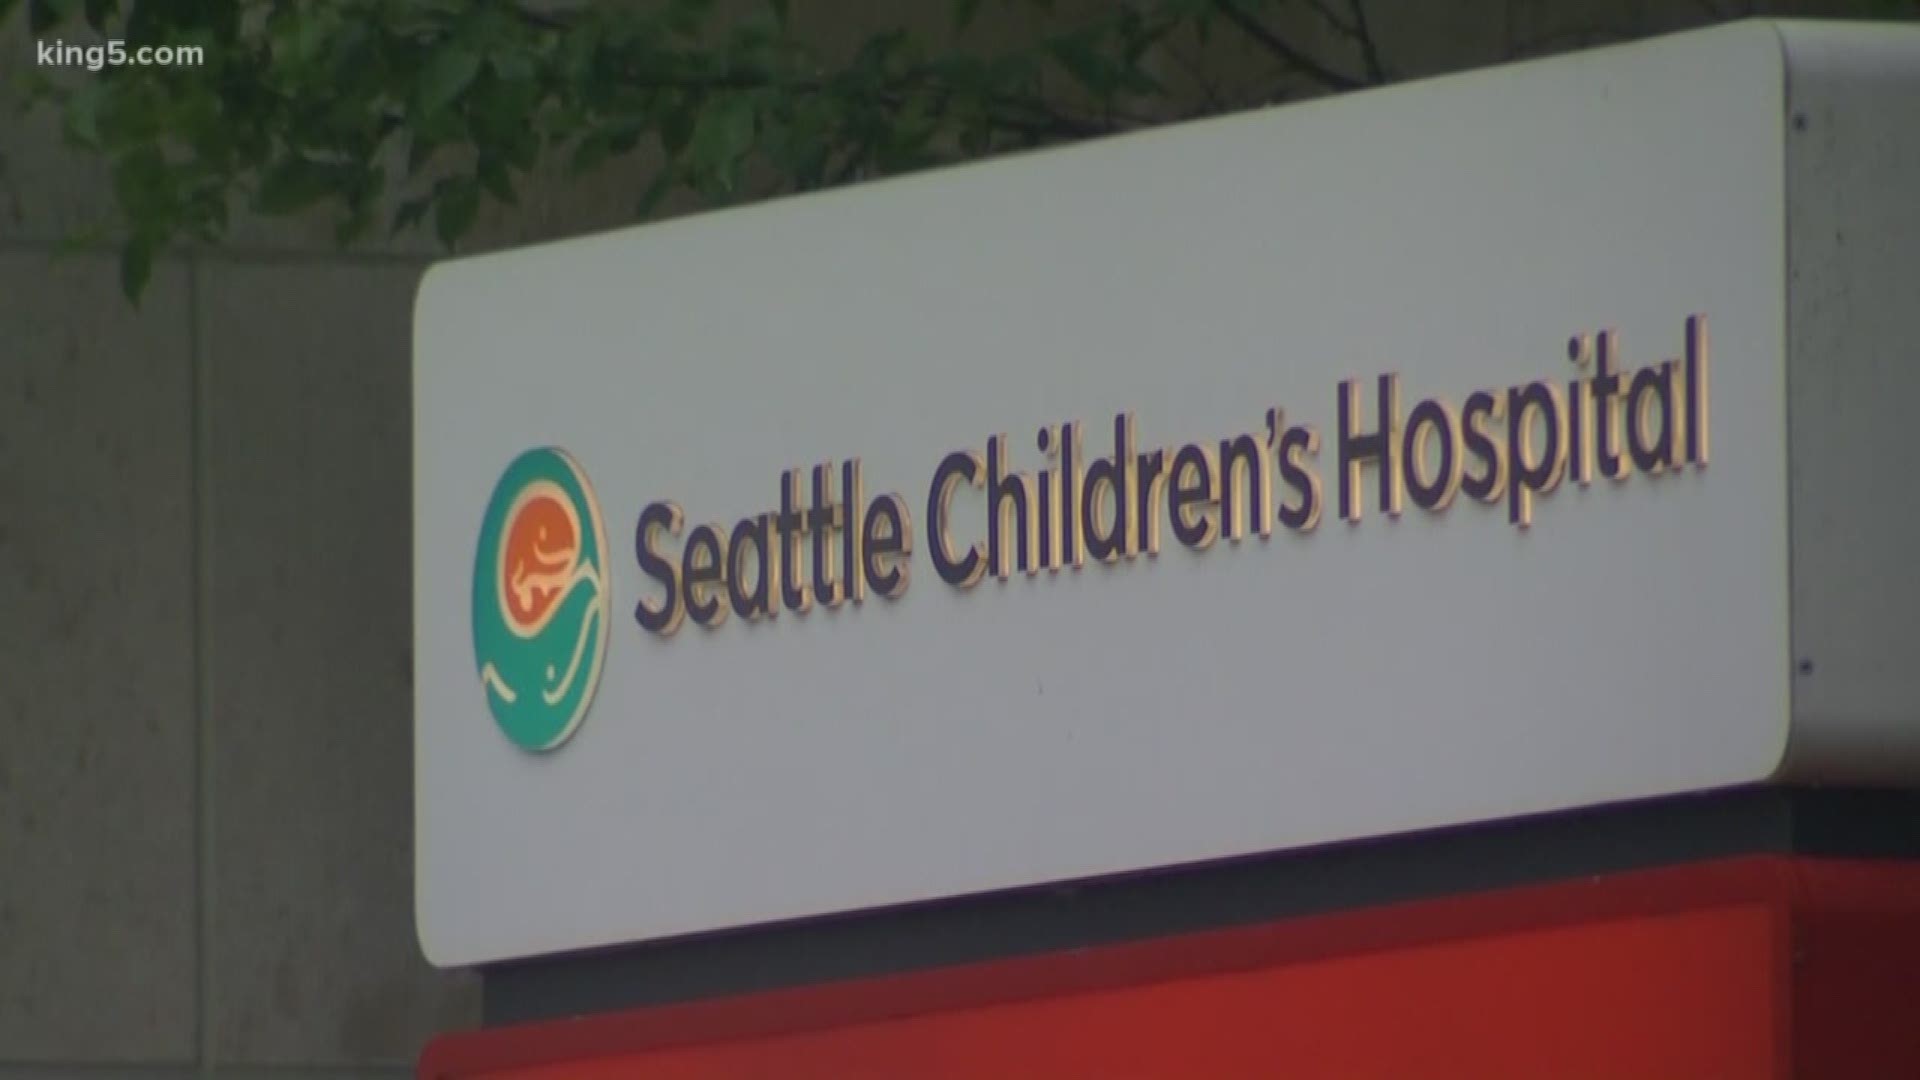 Between 2001 and 2014, seven patients developed Aspergillus surgical site infections, five of whom died, according to Seattle Children's.